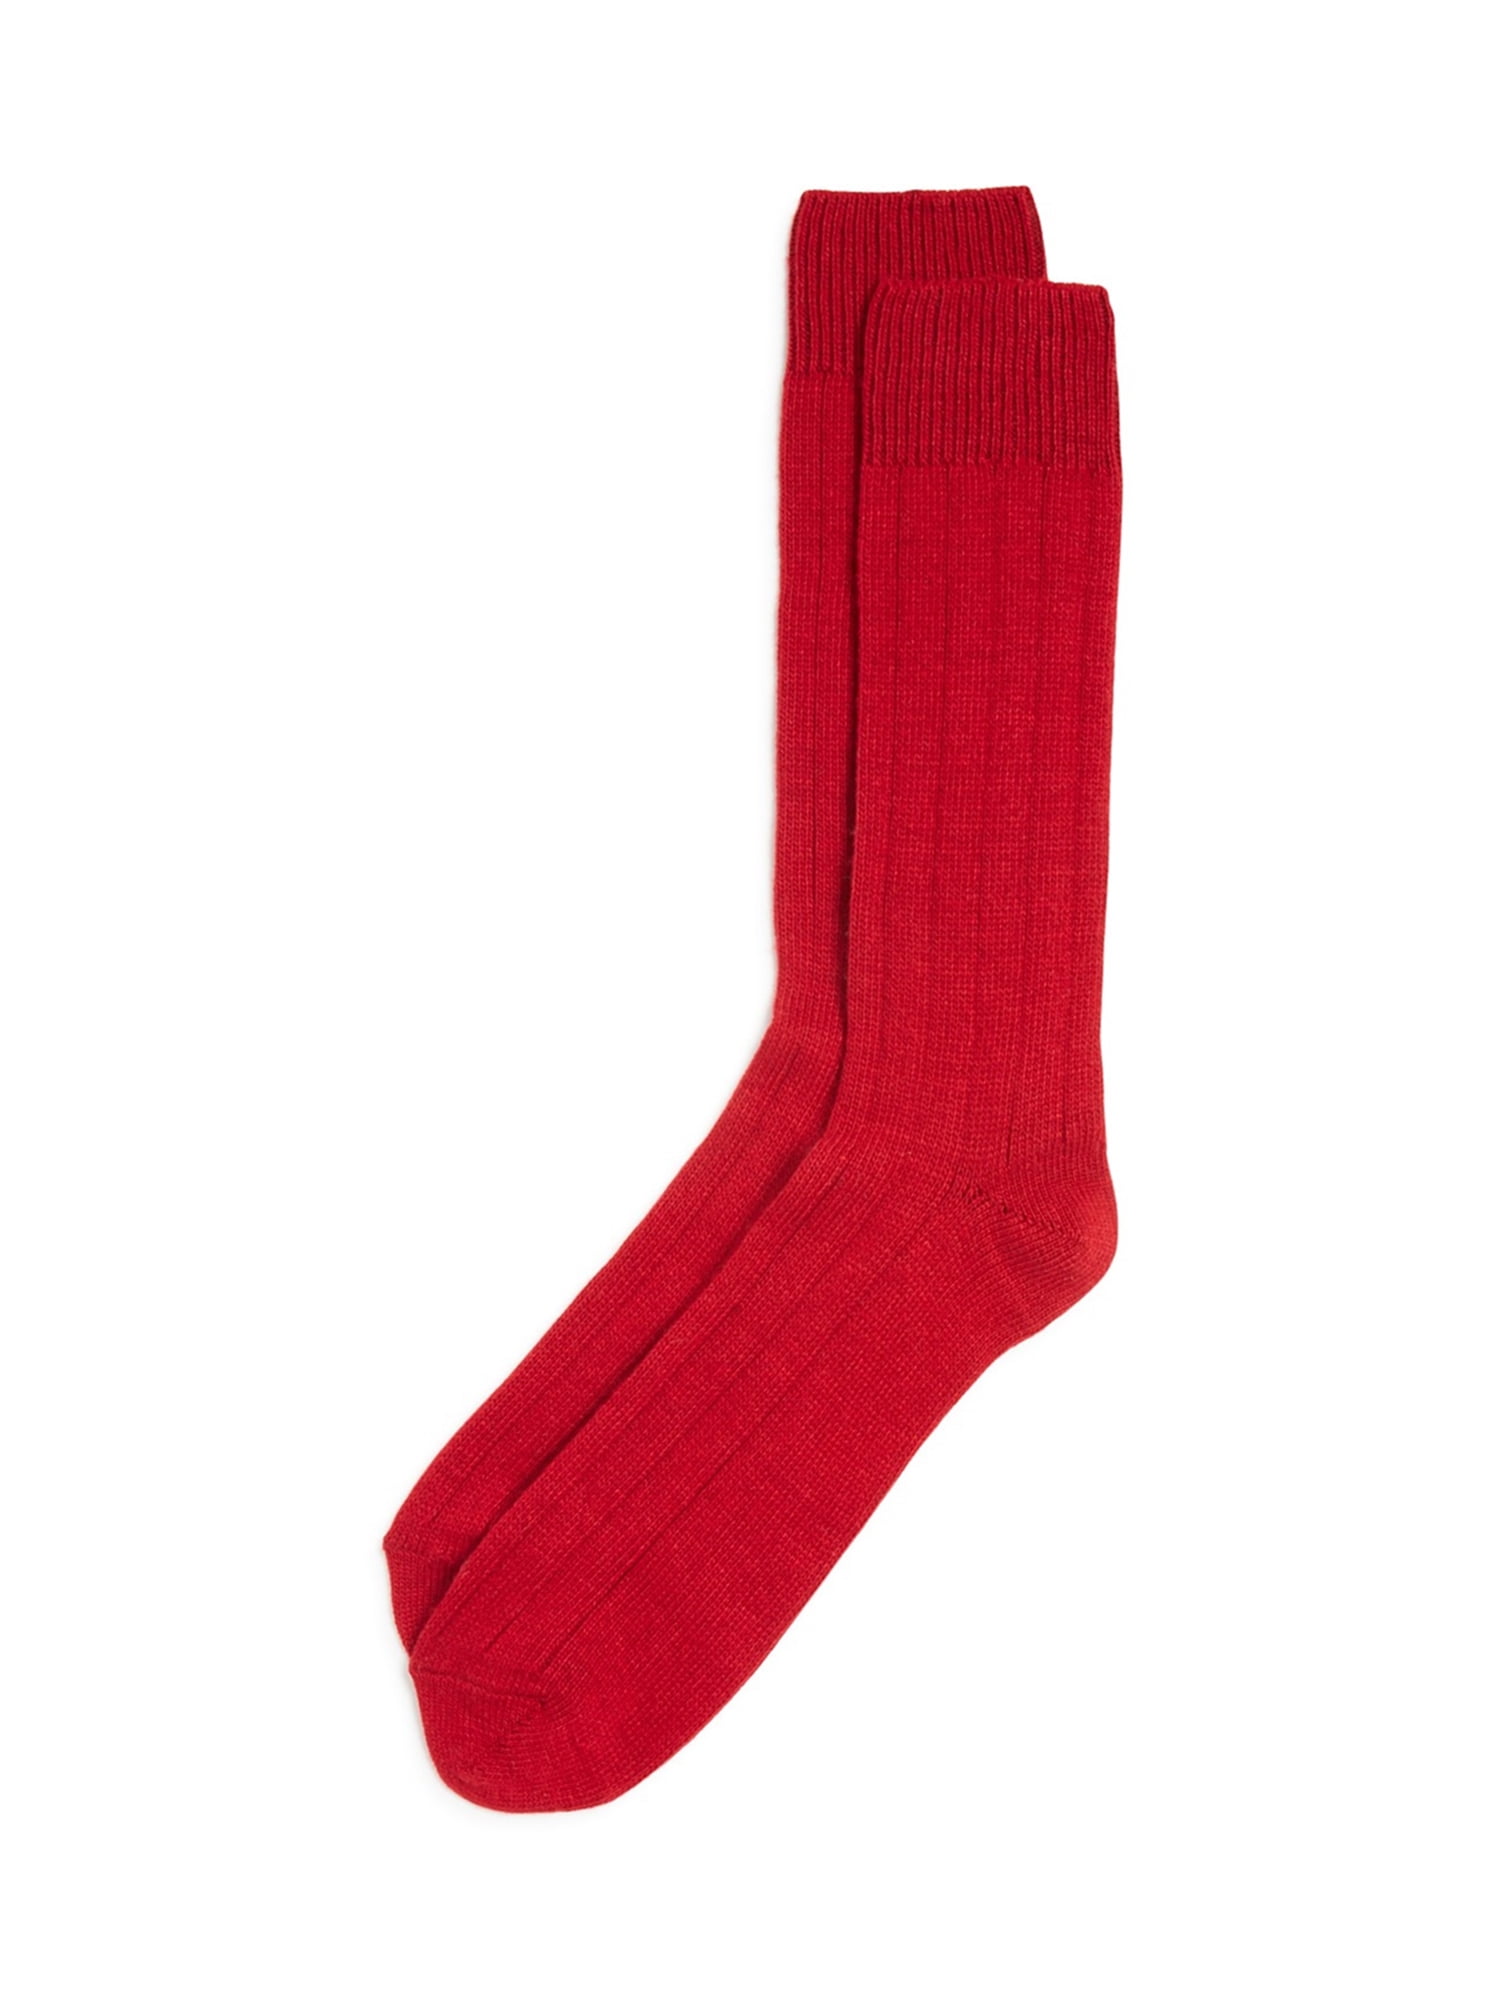 Bloomingdale's Mens Ribbed Midweight Socks firered One Size | Walmart ...